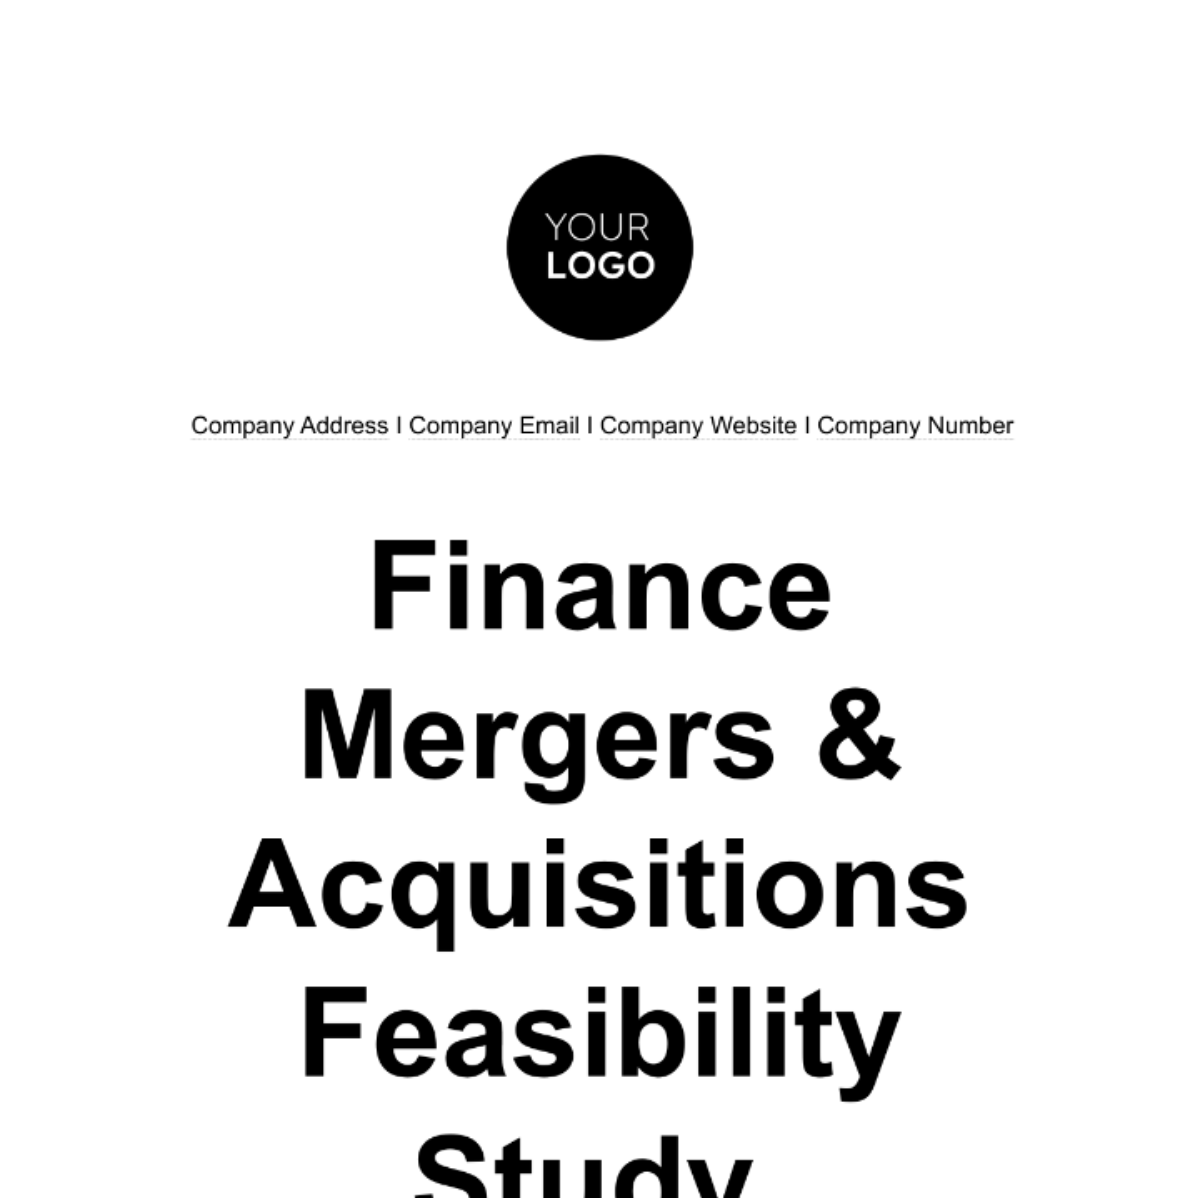 Finance Mergers & Acquisitions Feasibility Study Template